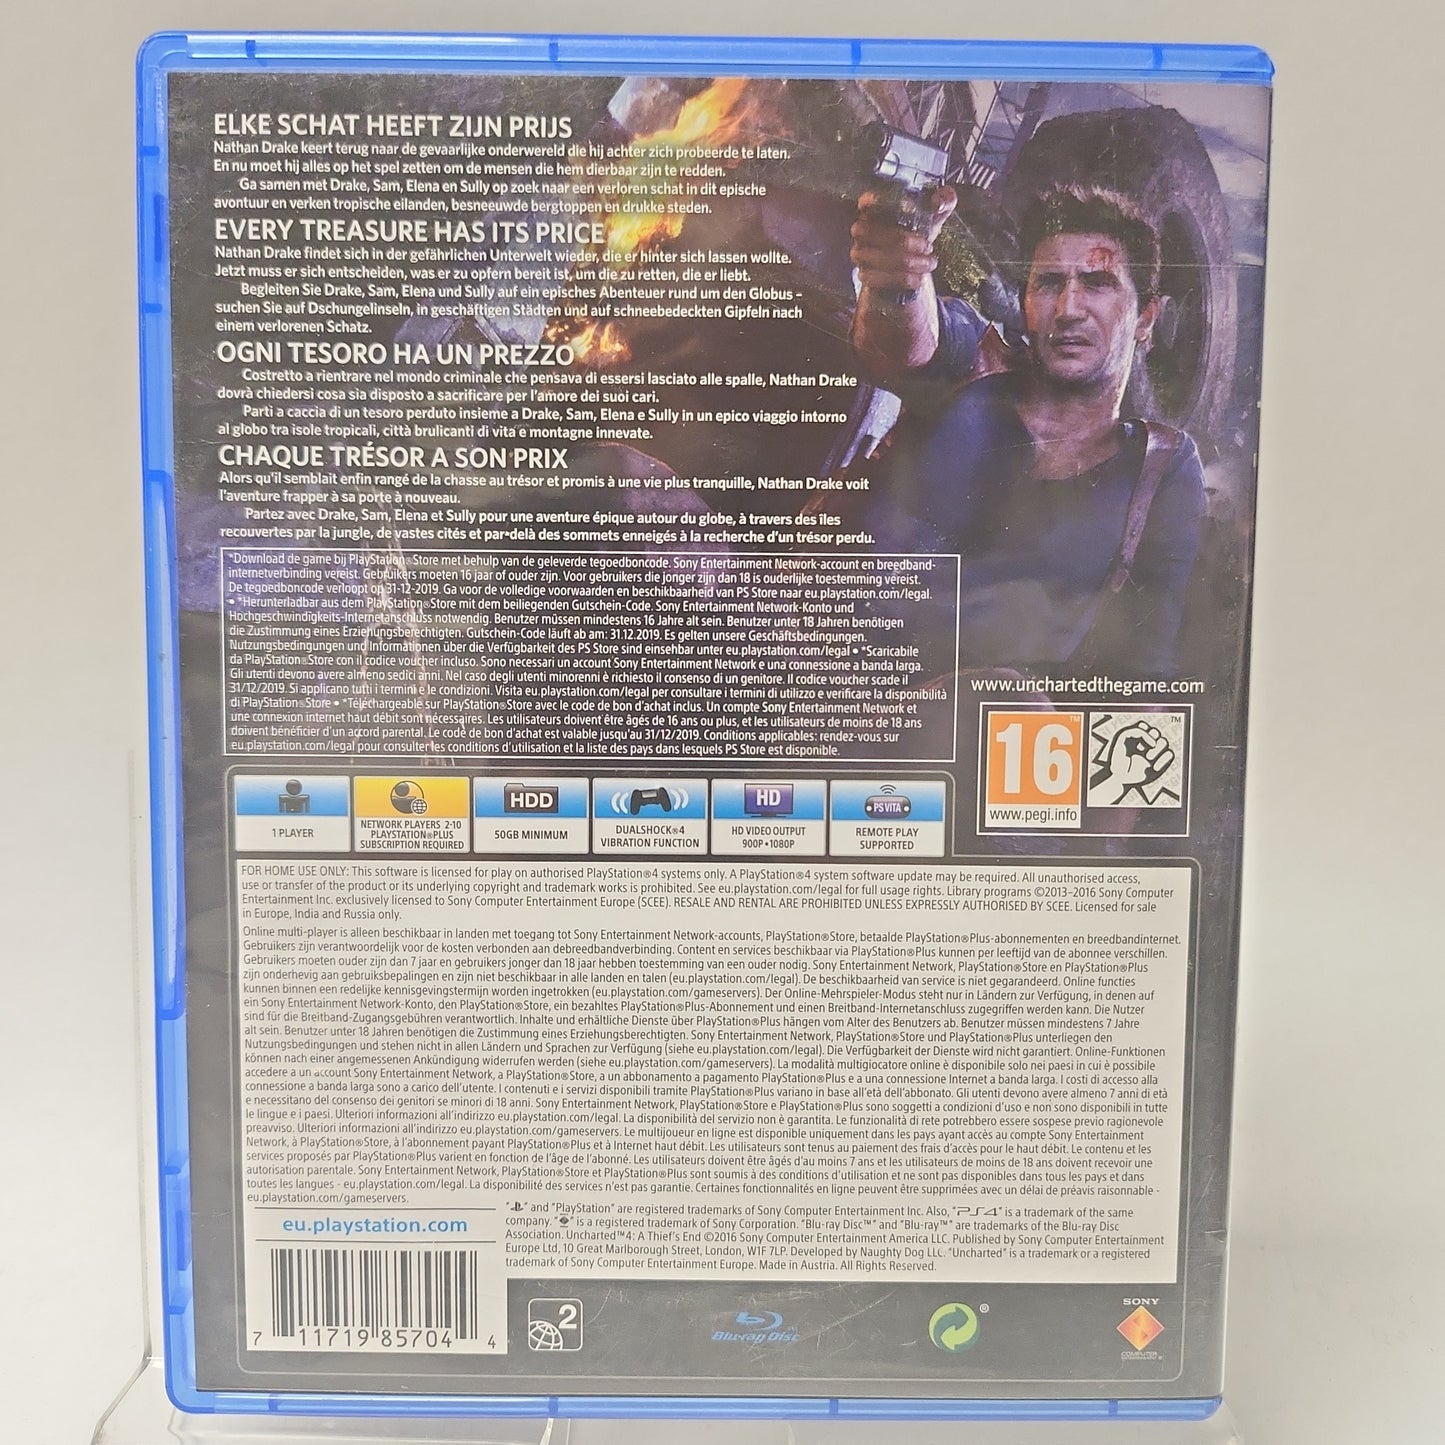 Uncharted 4 A Thief's End Playstation 4